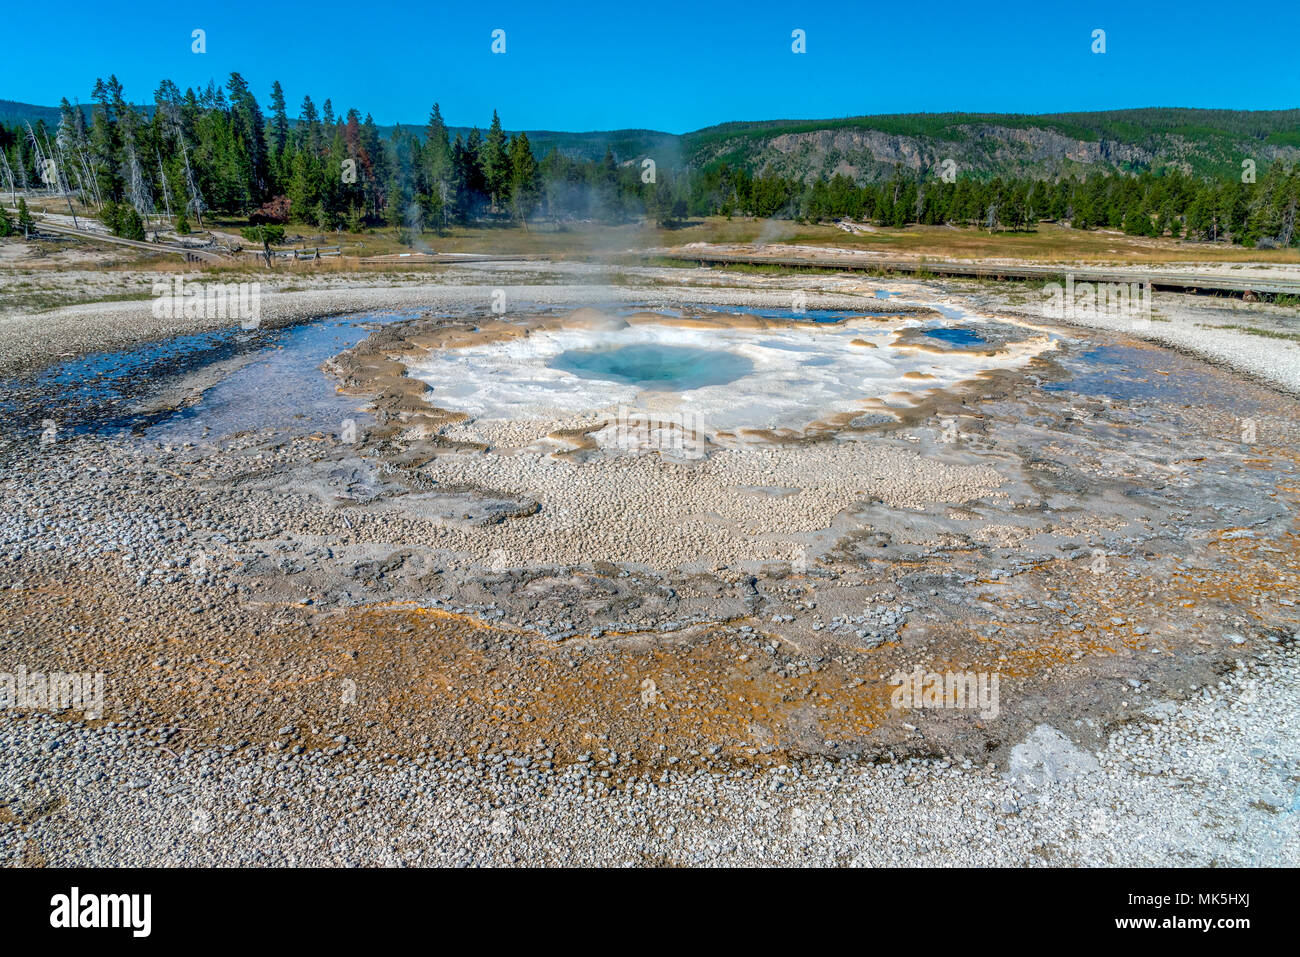 Bright blue hot springs in middle of barren field, with forest under bright blue sky. Stock Photo